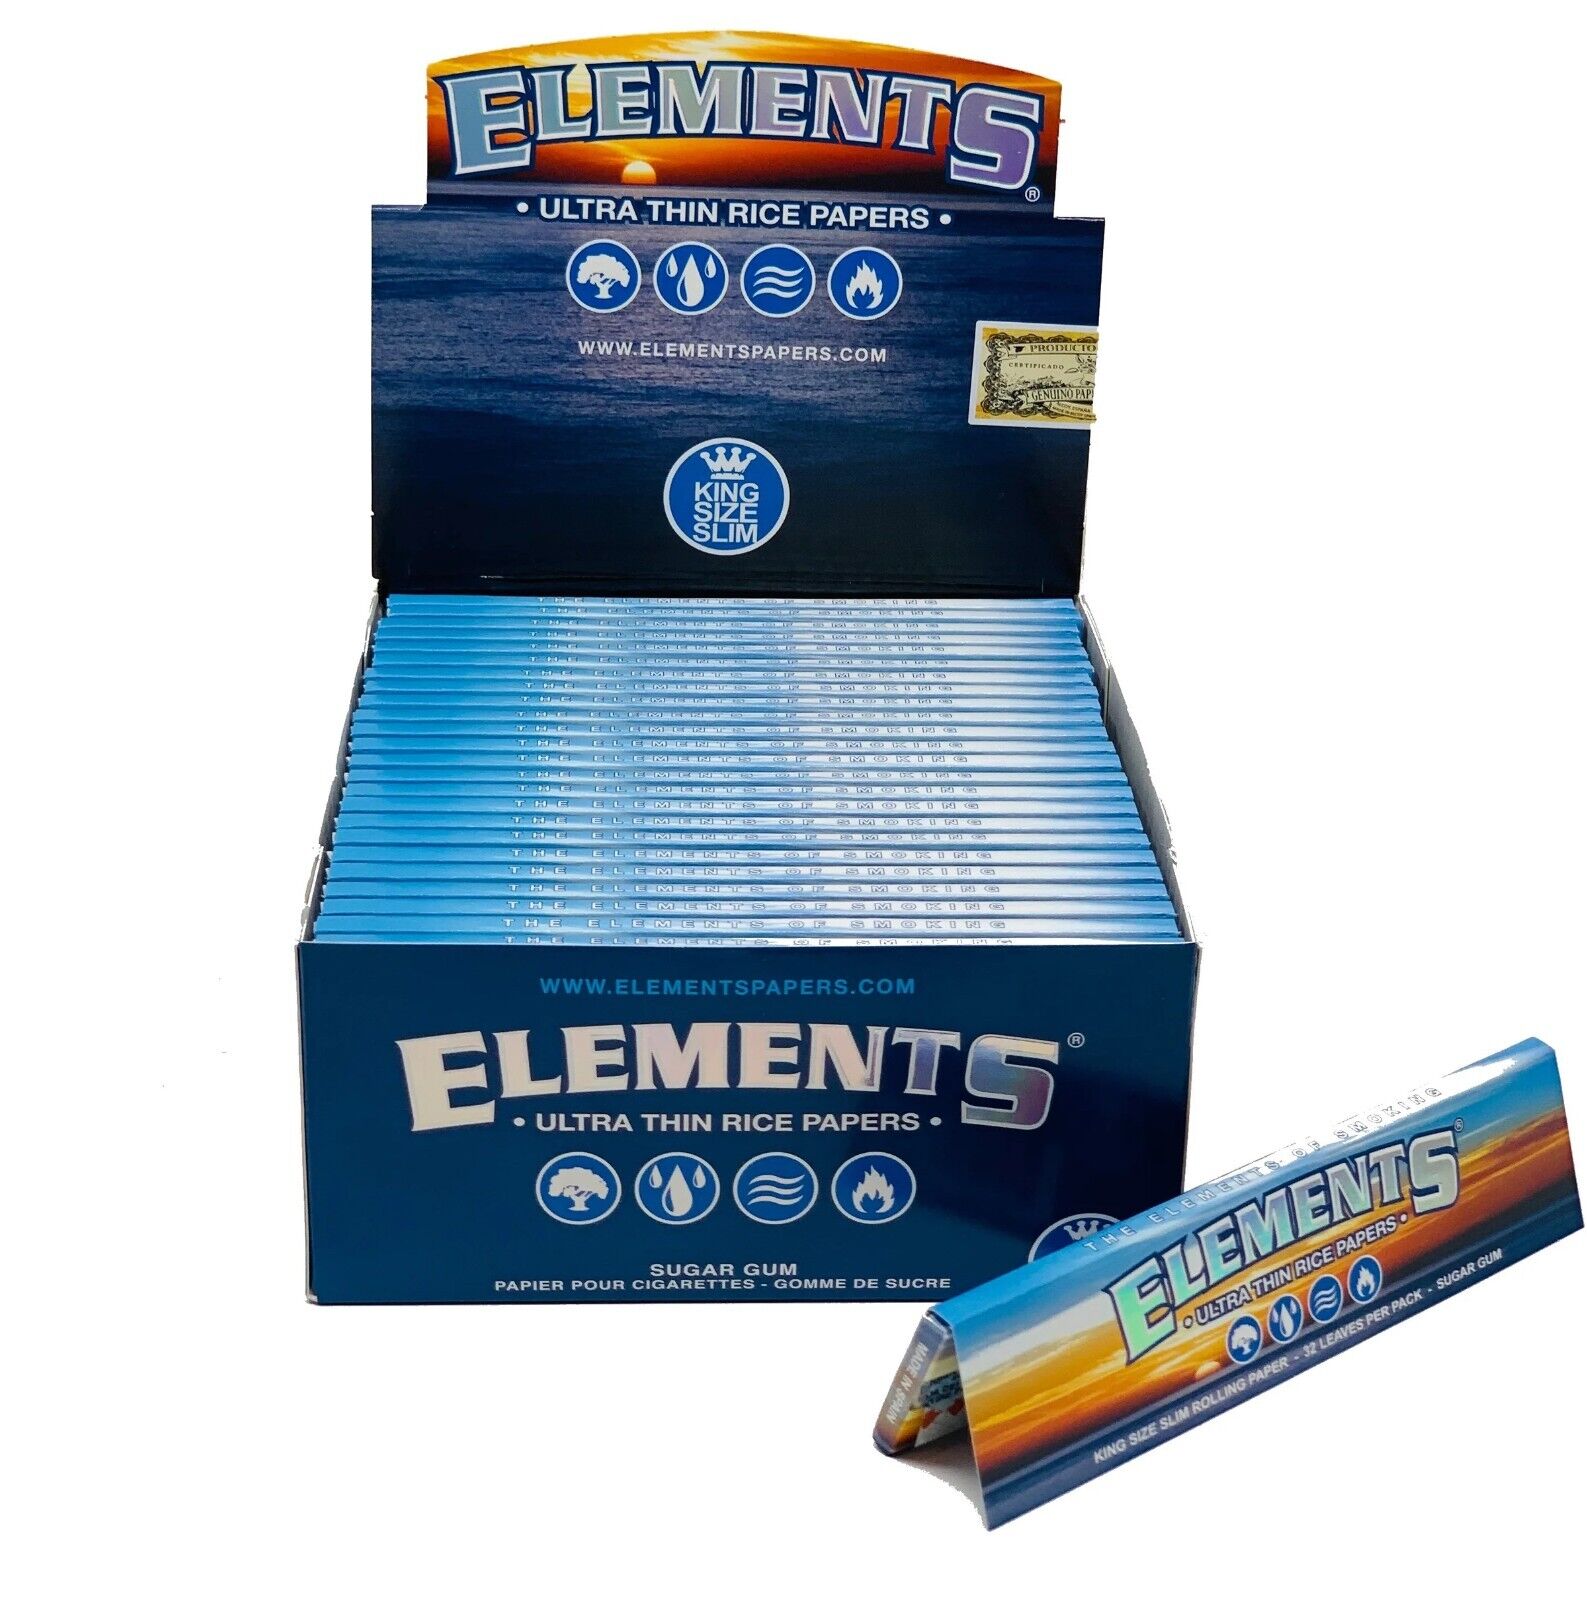 ELEMENTS KING SIZE SLIM ULTRA THIN RICE ROLLING PAPER 50 CT